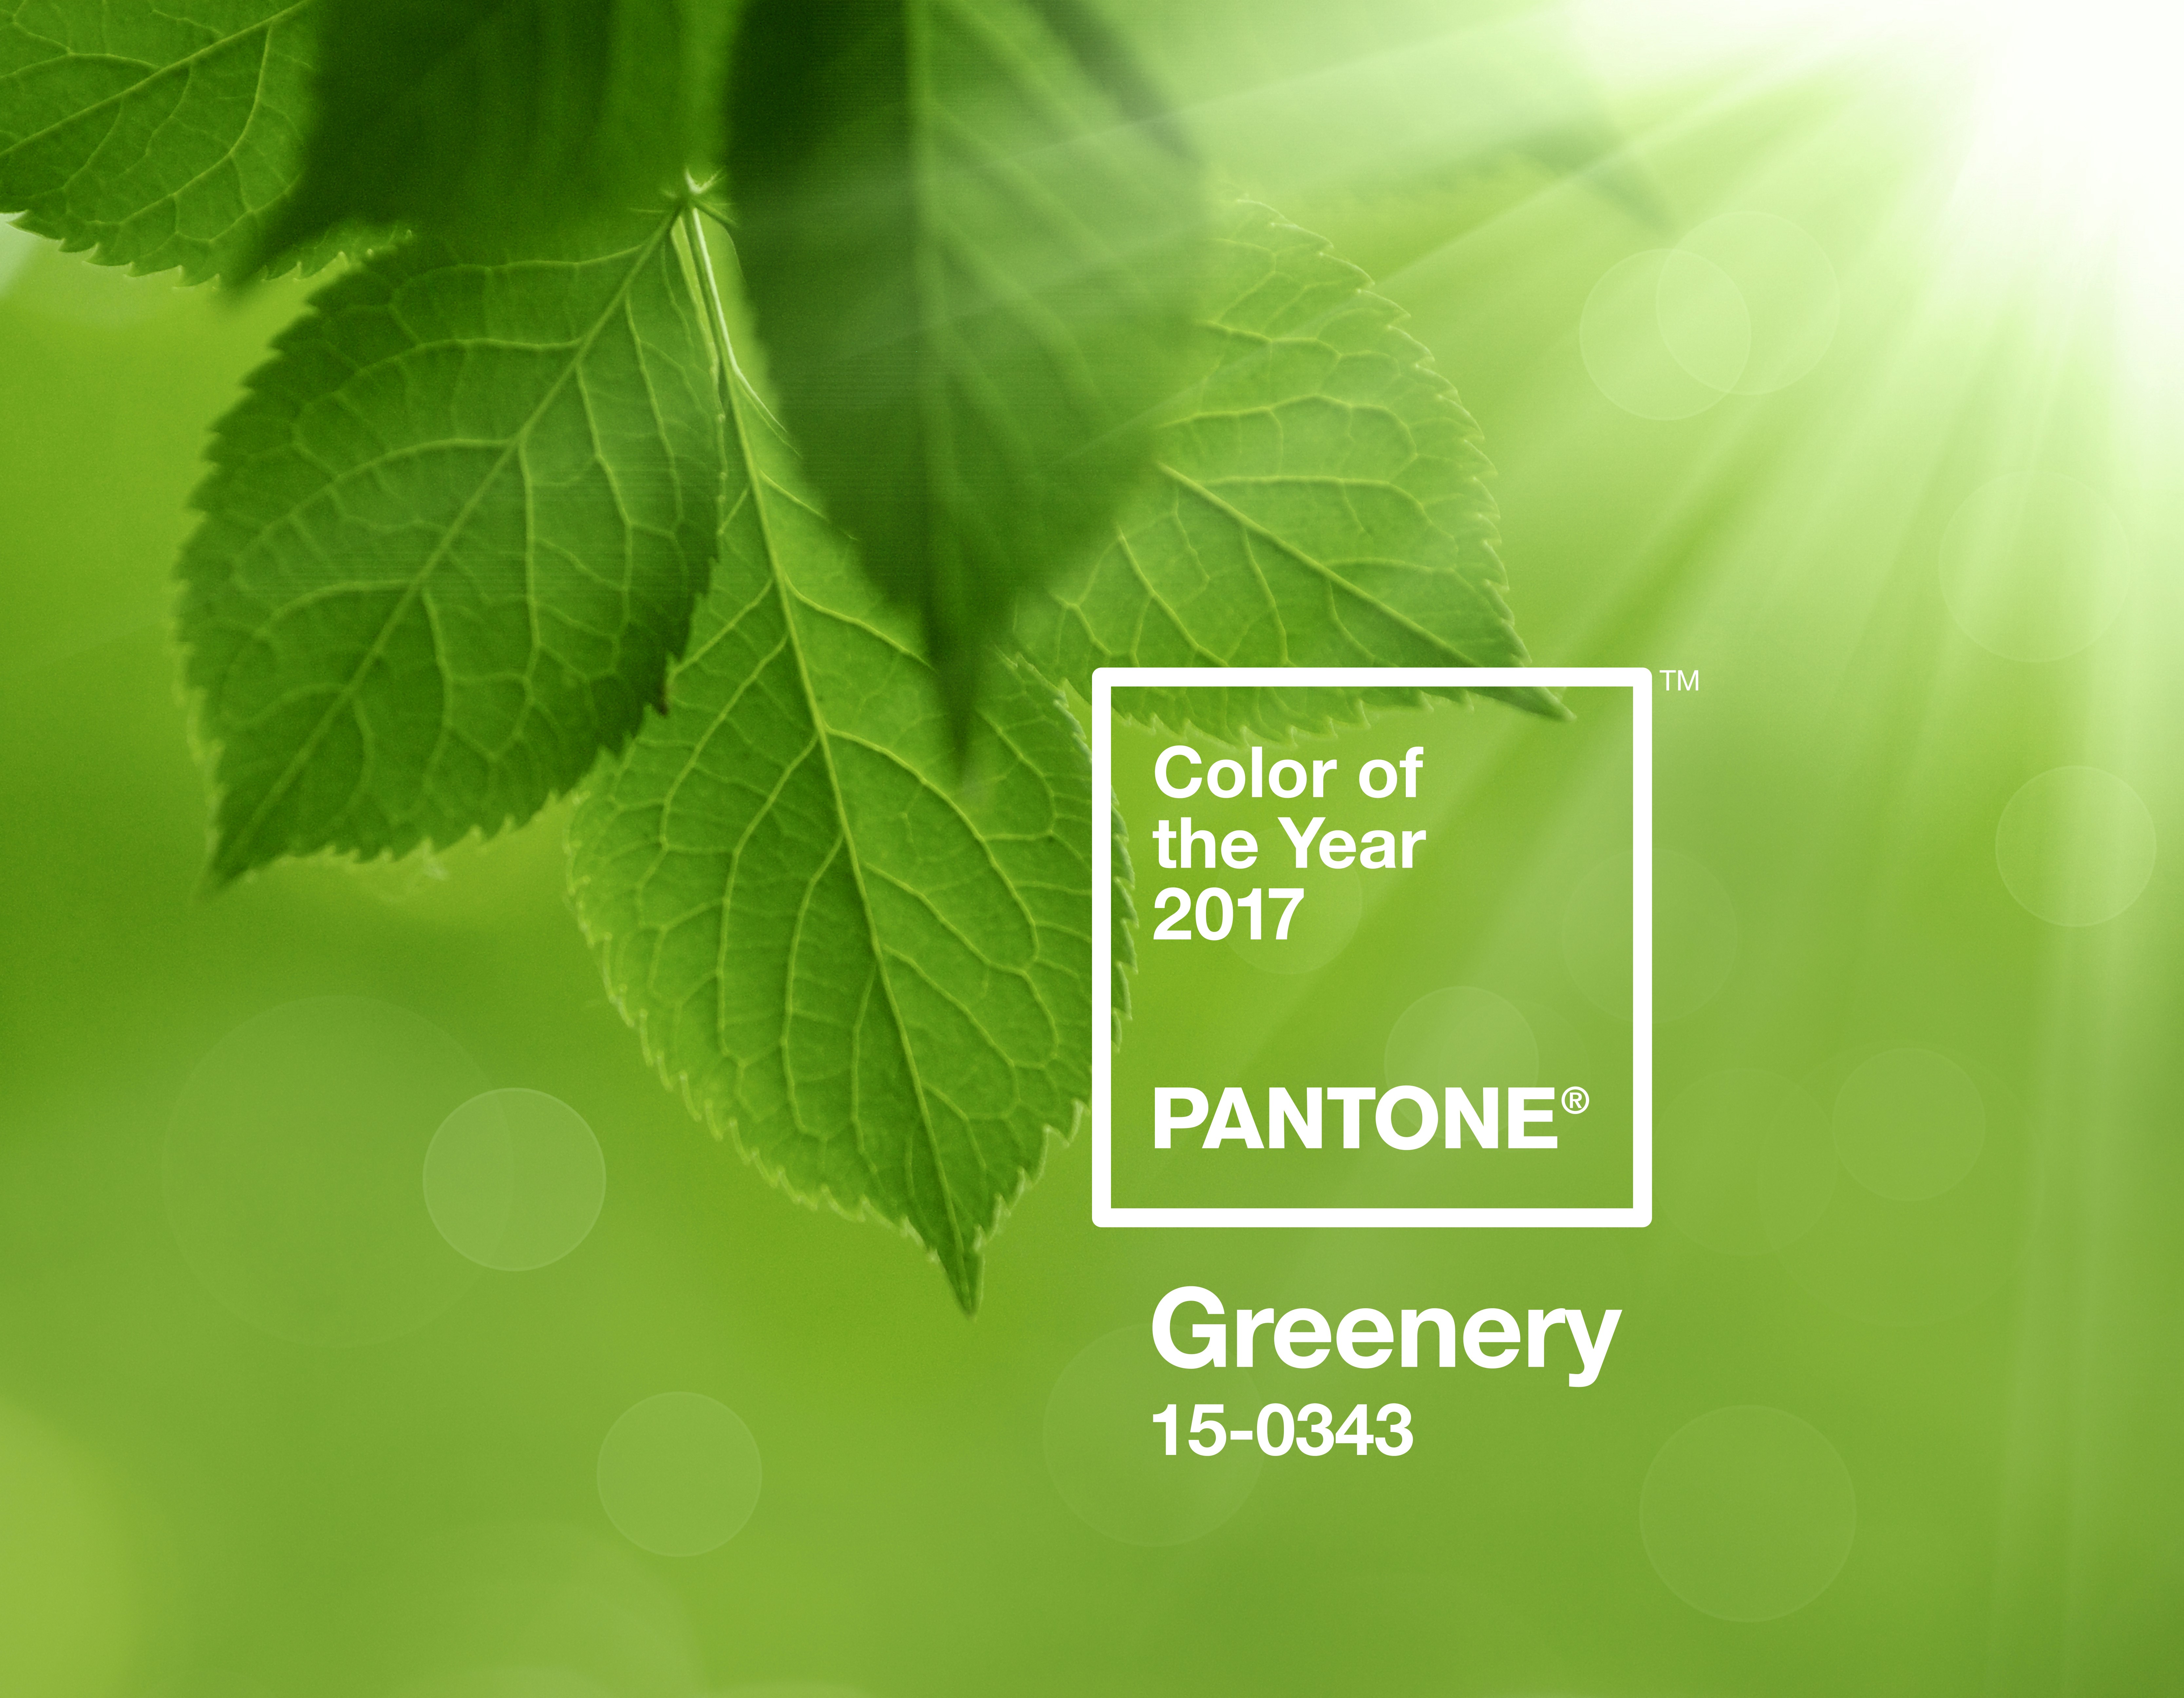 pantone-color-of-the-year-2017-greenery-15-0343-press-release-1